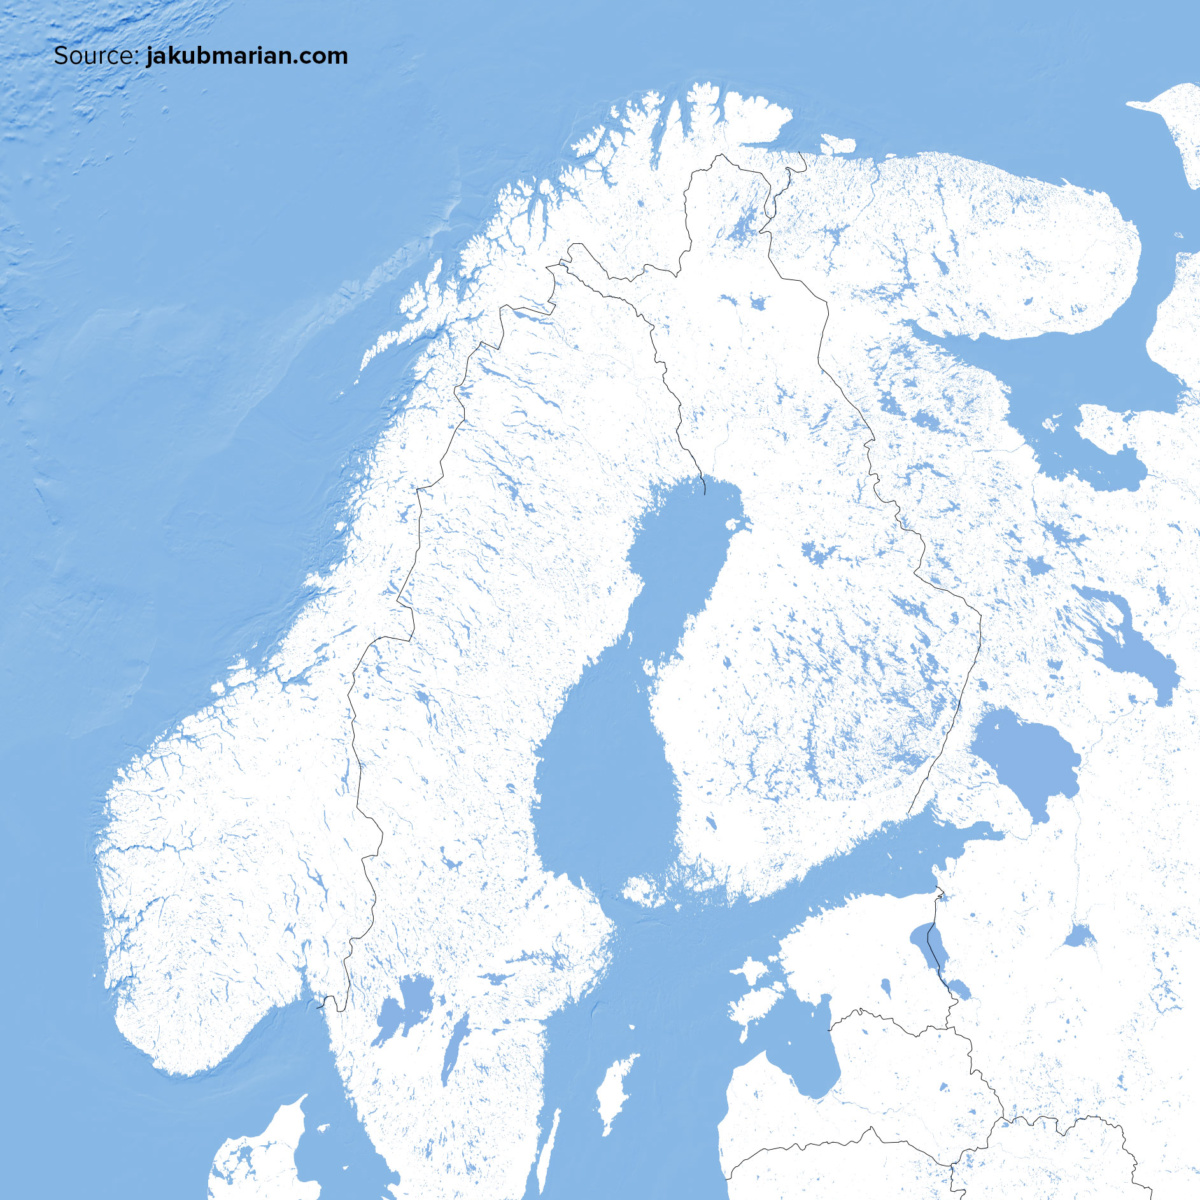 Water bodies of Scandinavia and Baltic states